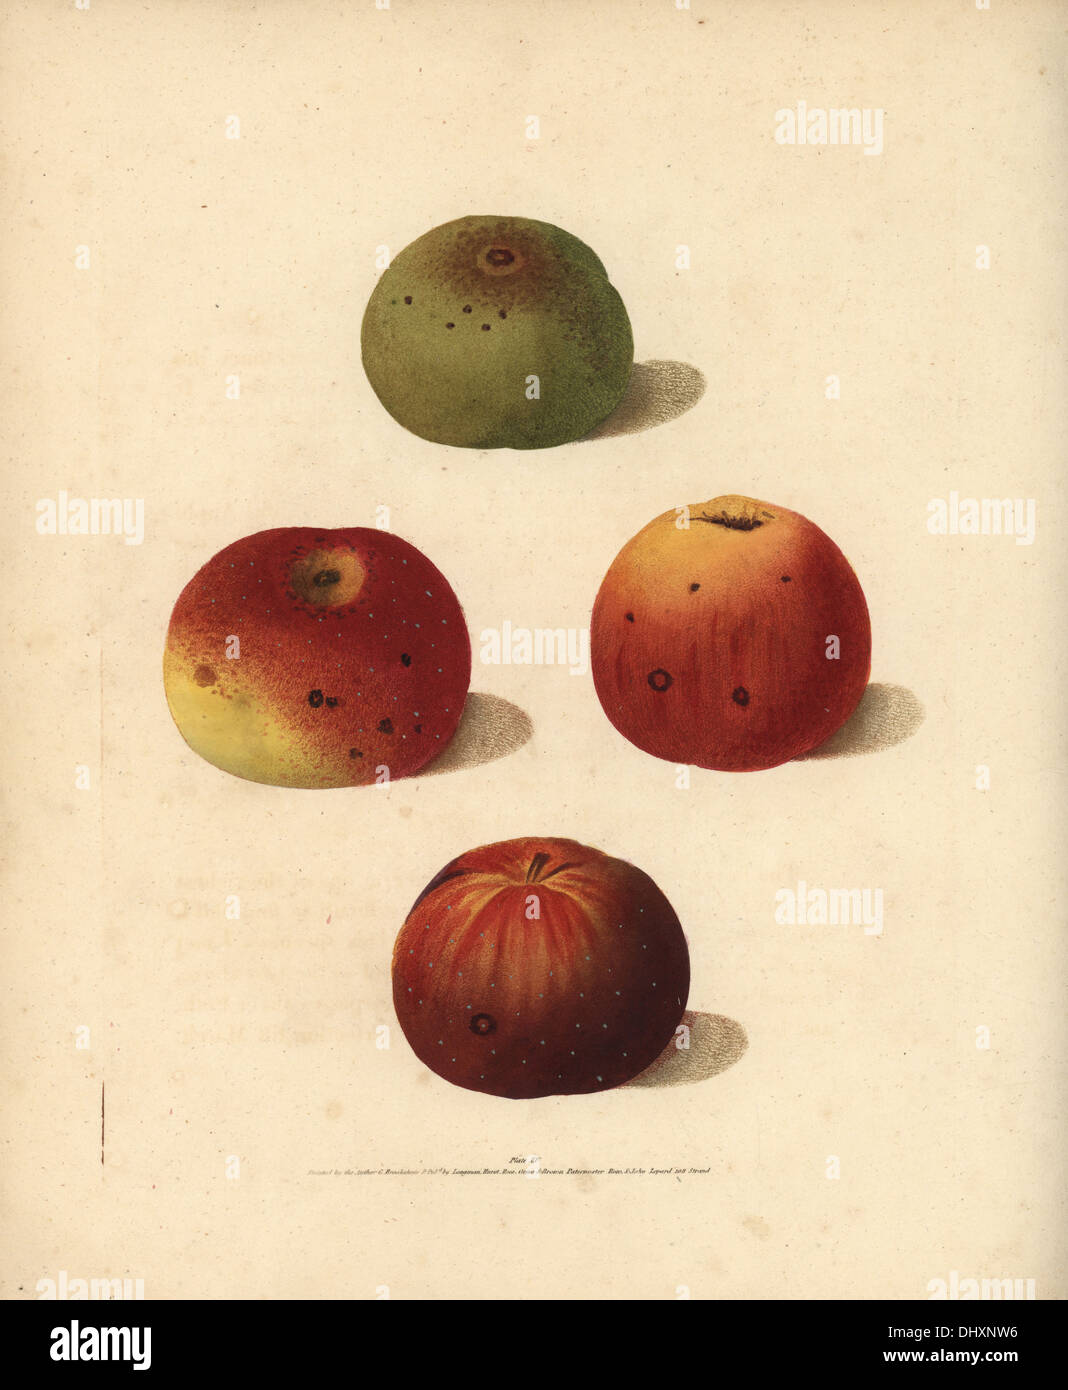 Apple varieties, Malus domestica: Brown's Pippin, Fenn's Pippin, True Aromatic Pippin and Spitzburgh Pippin. Stock Photo